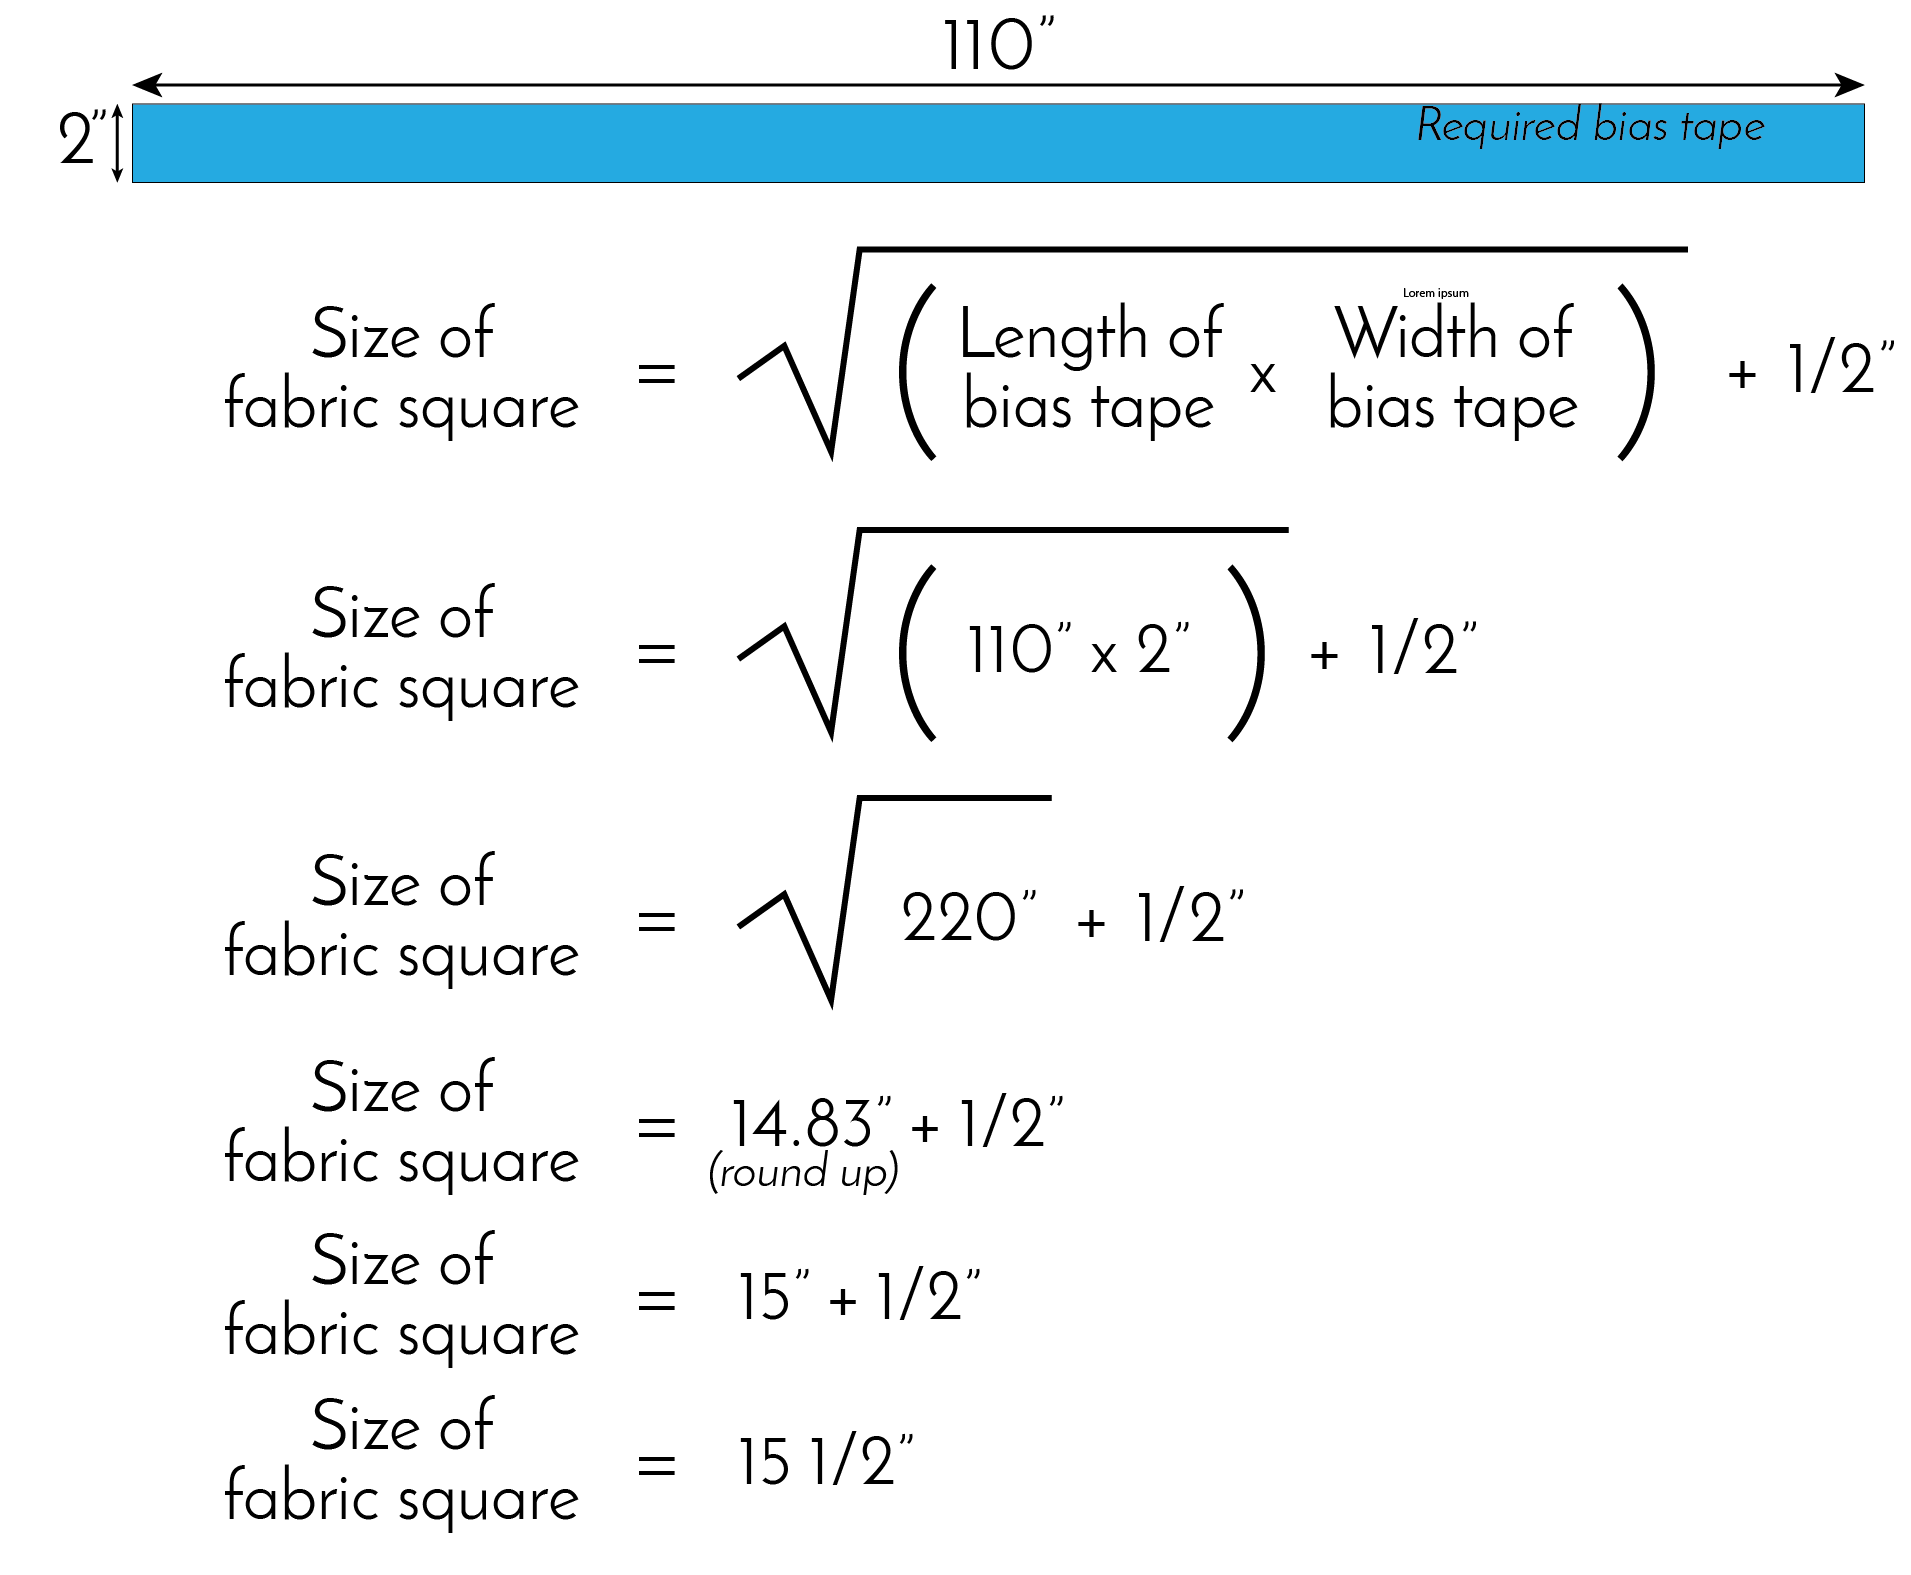 Standard formula with rounding - 110"